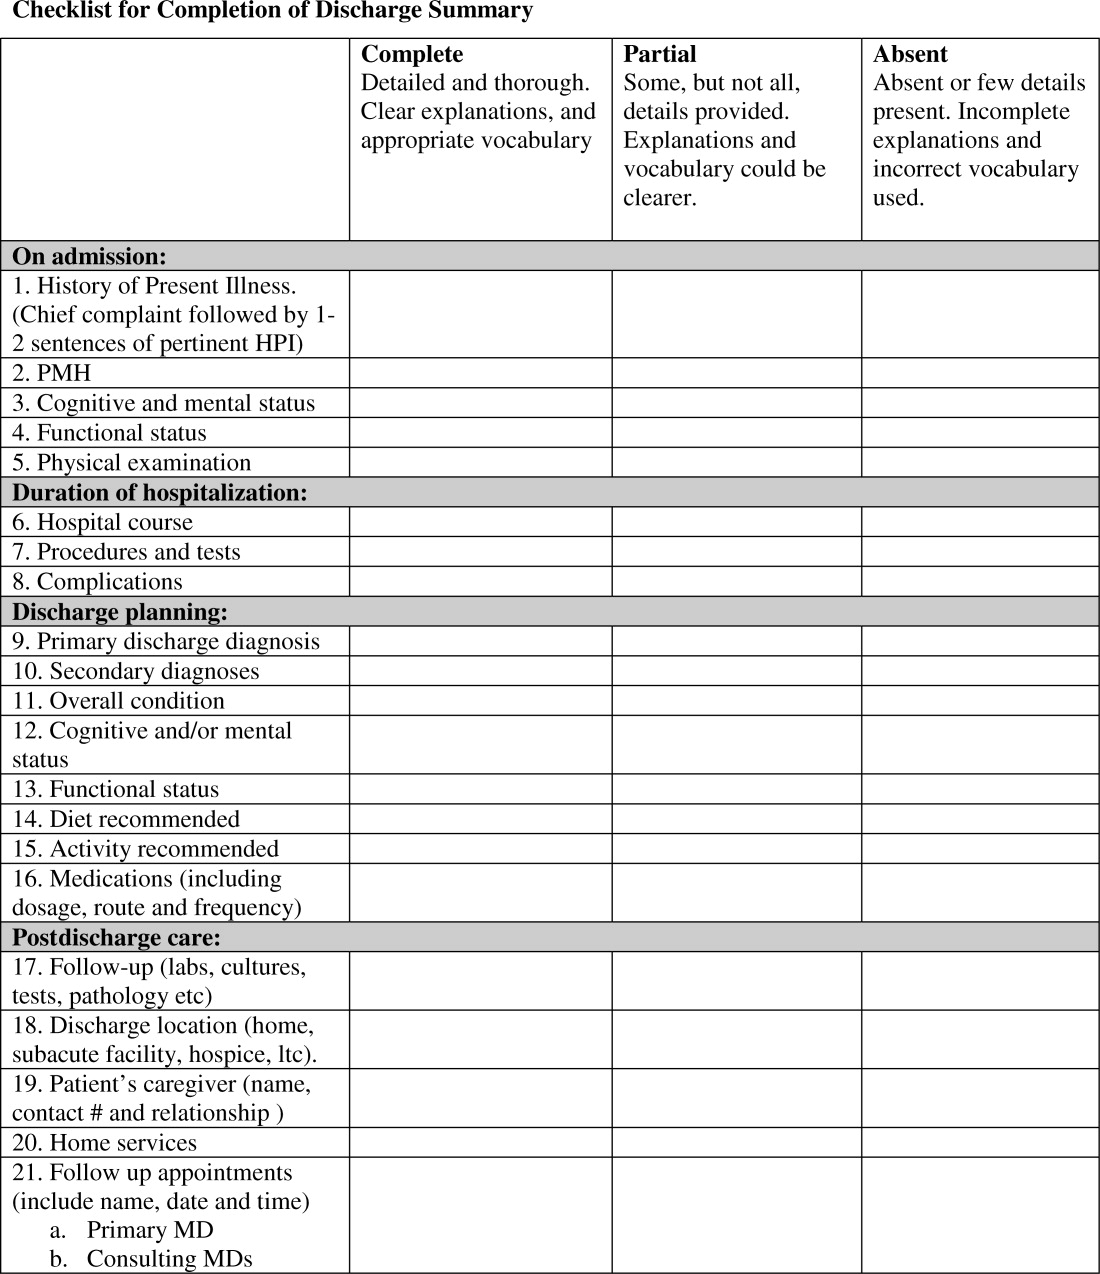 Discharge Summary Completion  Journal of Hospital Medicine In Discharge Planning Checklist Template Inside Discharge Planning Checklist Template